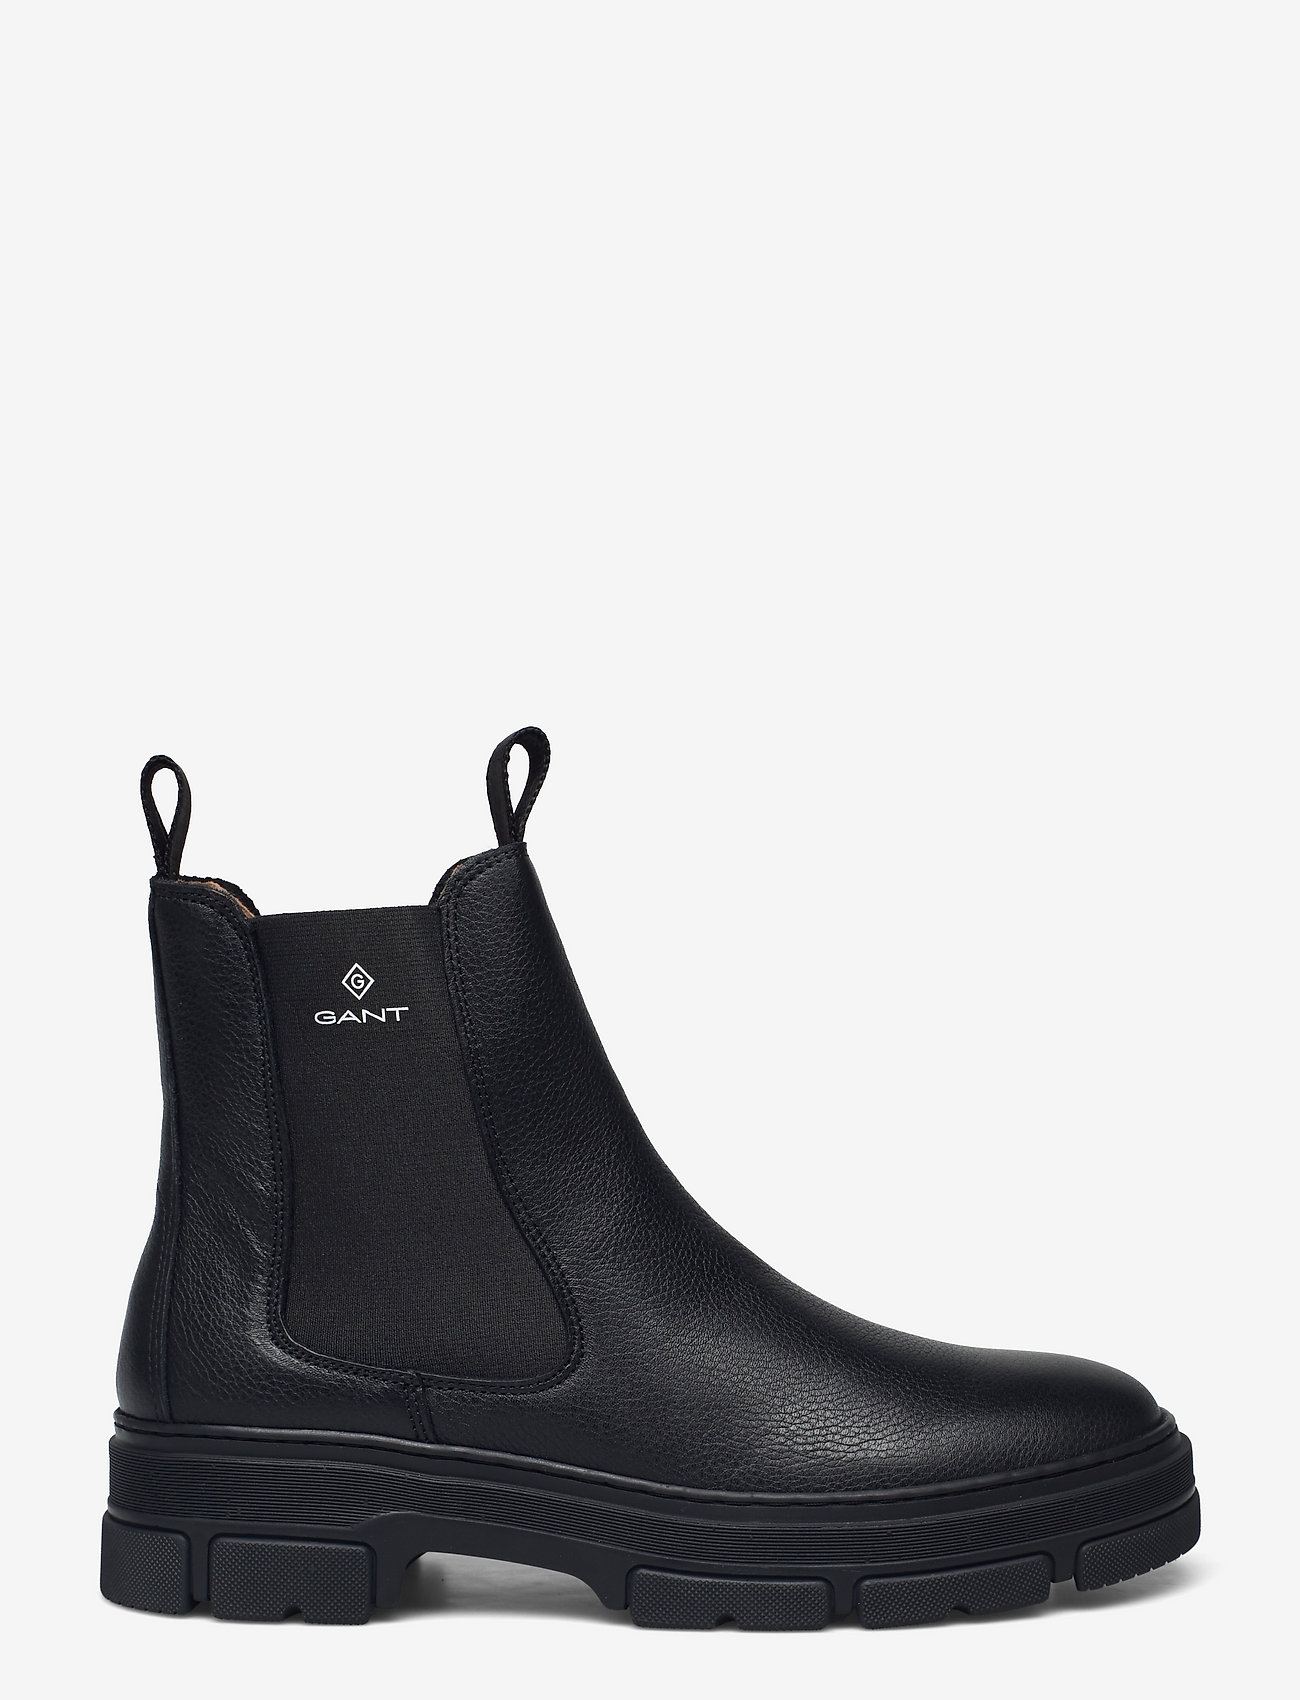 GANT Monthike Mid Boot - boots | Boozt.com